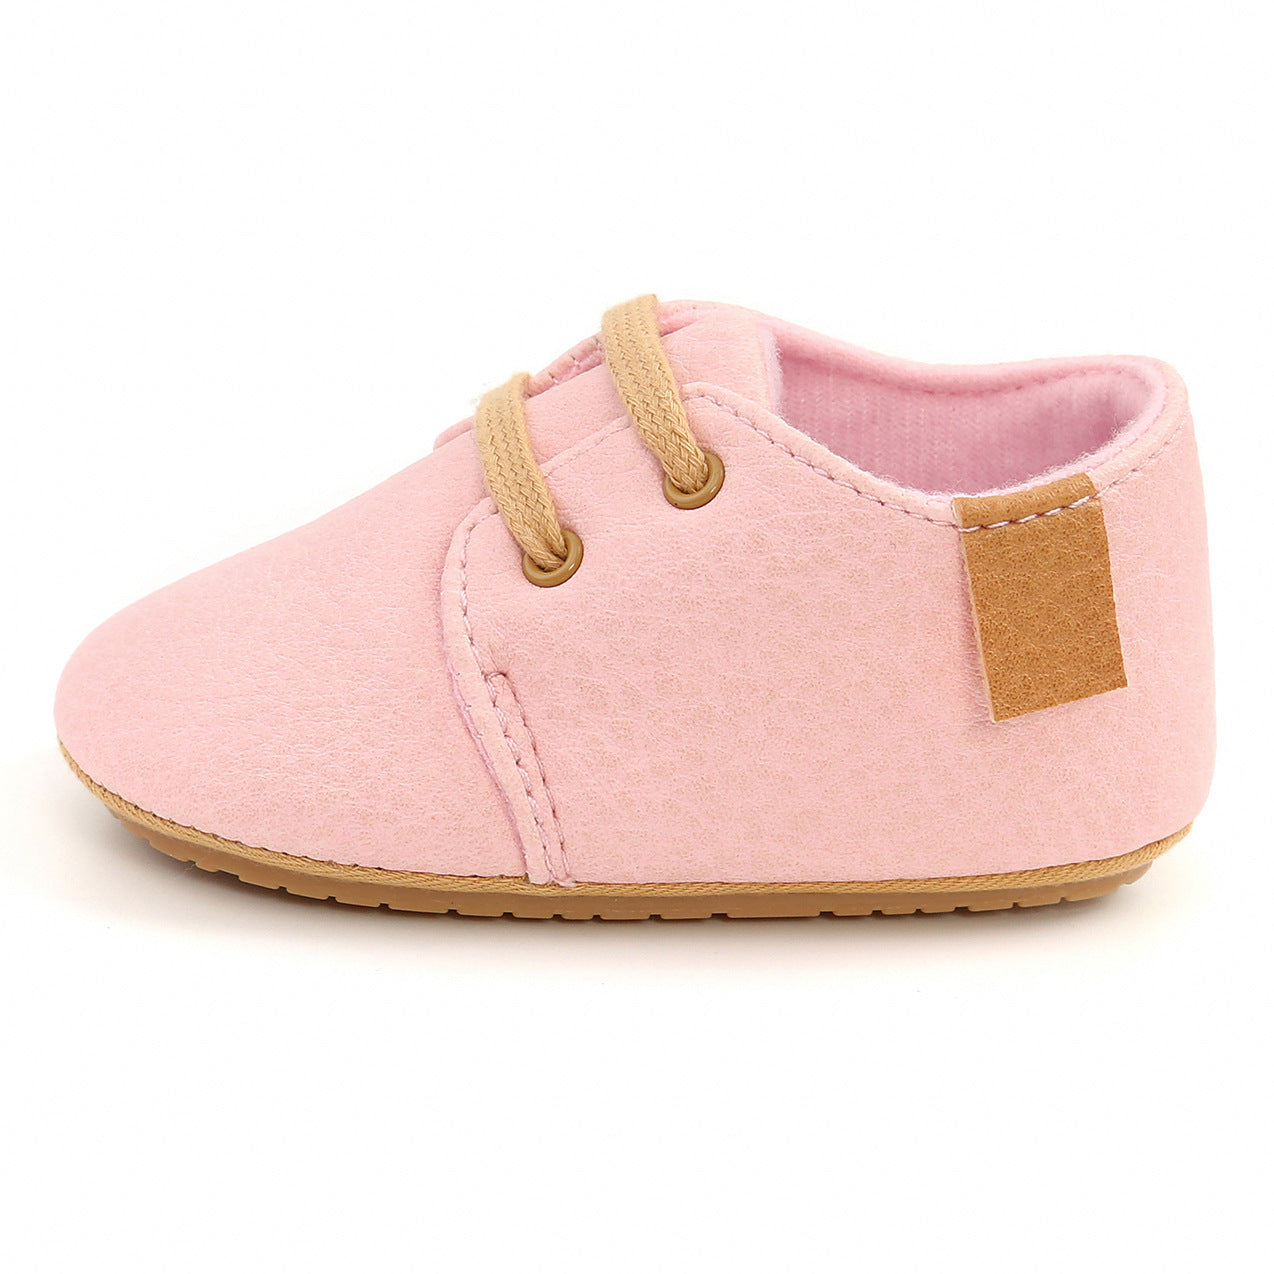 Soft Leather Baby Moccasins with Rubber Sole for Newborns and Toddlers - MAMTASTIC